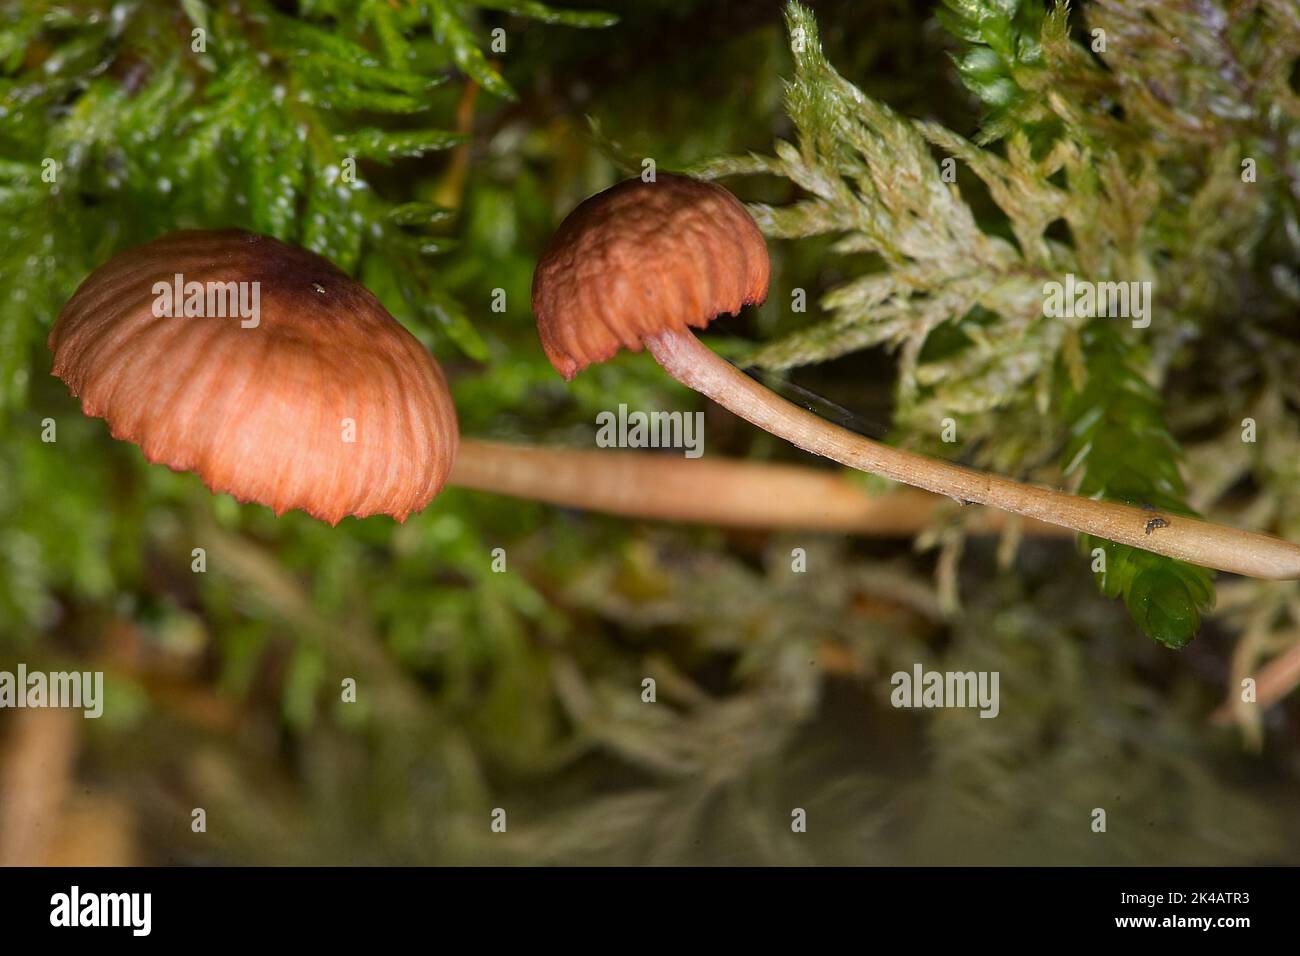 Pink-cut helminth two fruiting bodies with pale pink stems and light brown caps in green moss Stock Photo